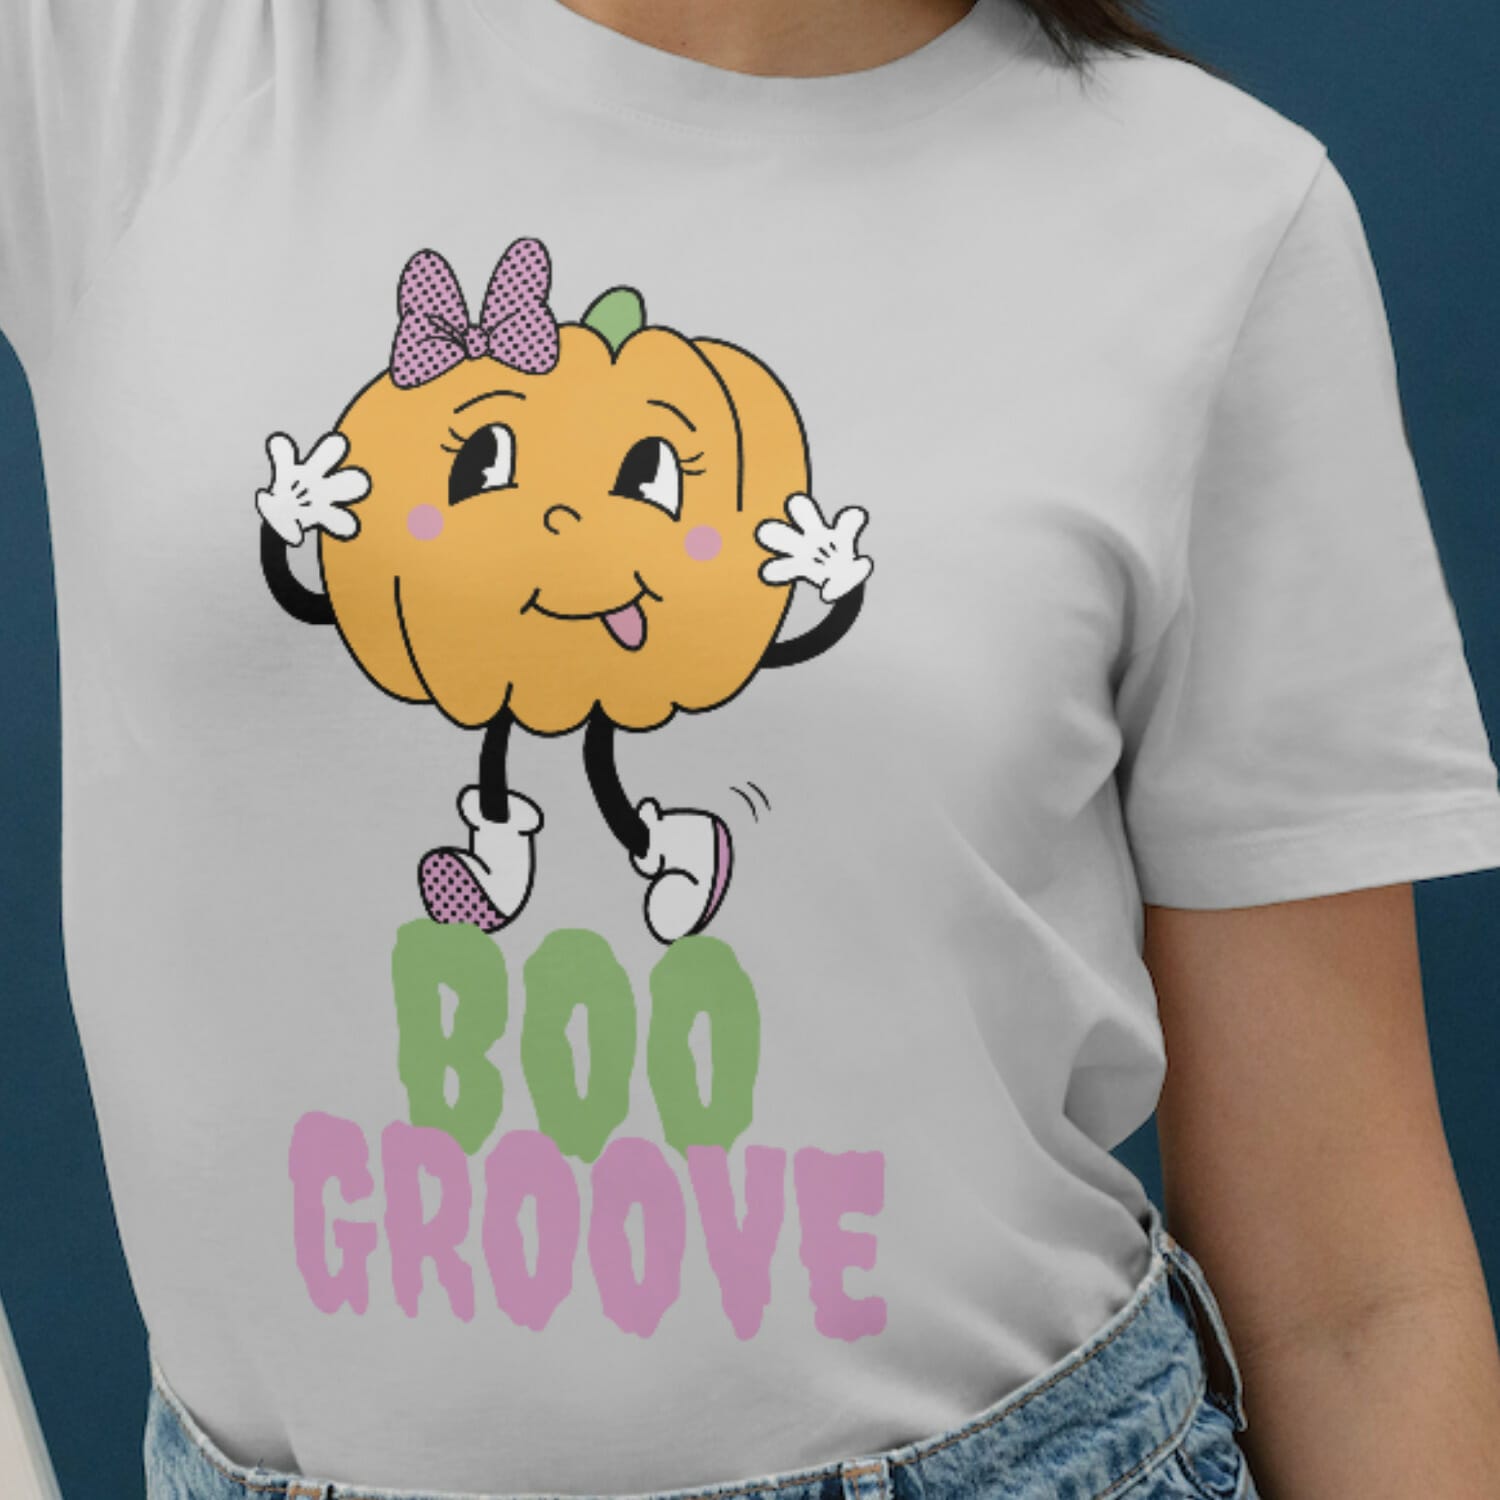 Get into the Halloween spirit with our "Groovy Halloween Boo Groove" t-shirt design. Spook in style - get the design now.